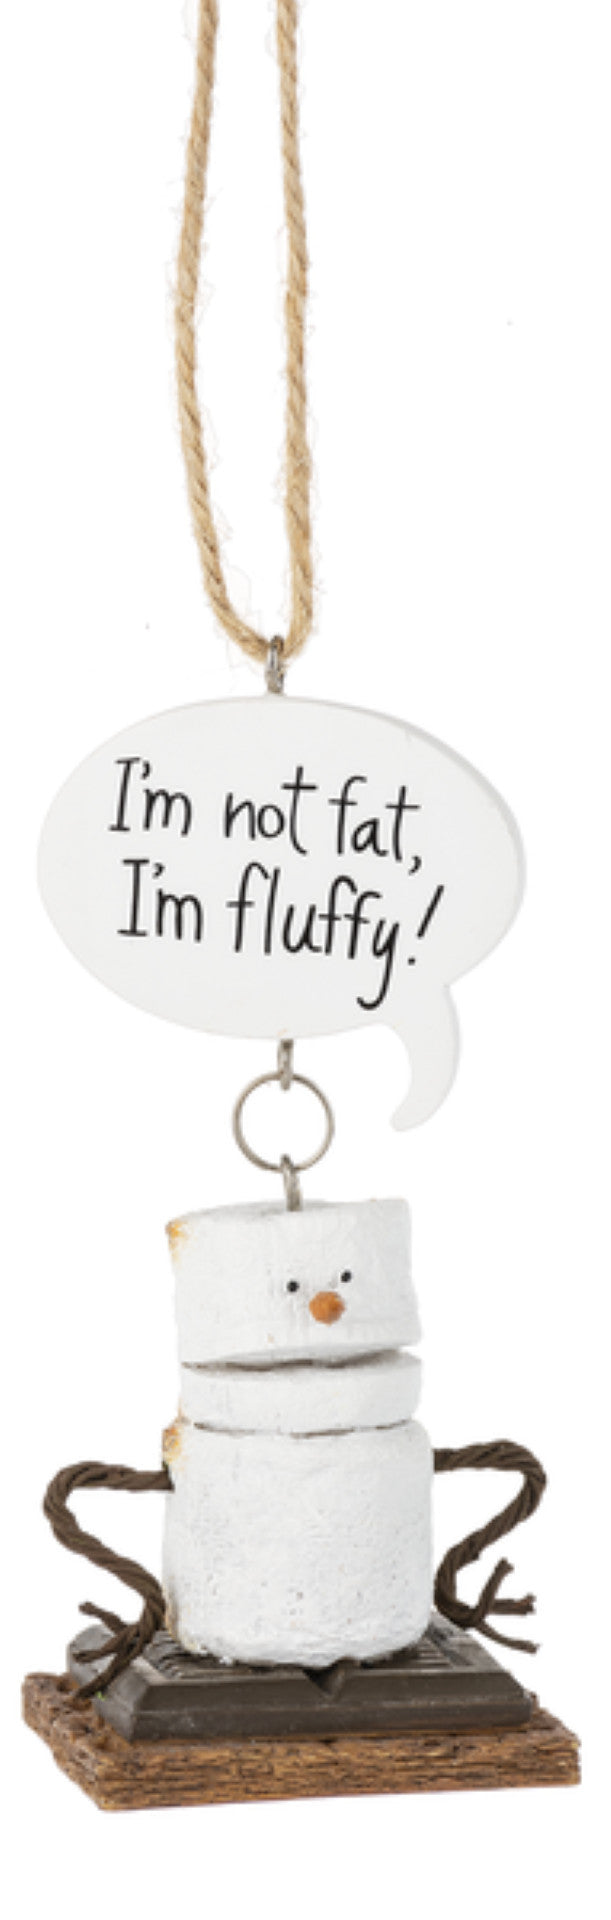 Toasted S'mores Ornament - I'm Not Fat, I'm Fluffy! - The Country Christmas Loft